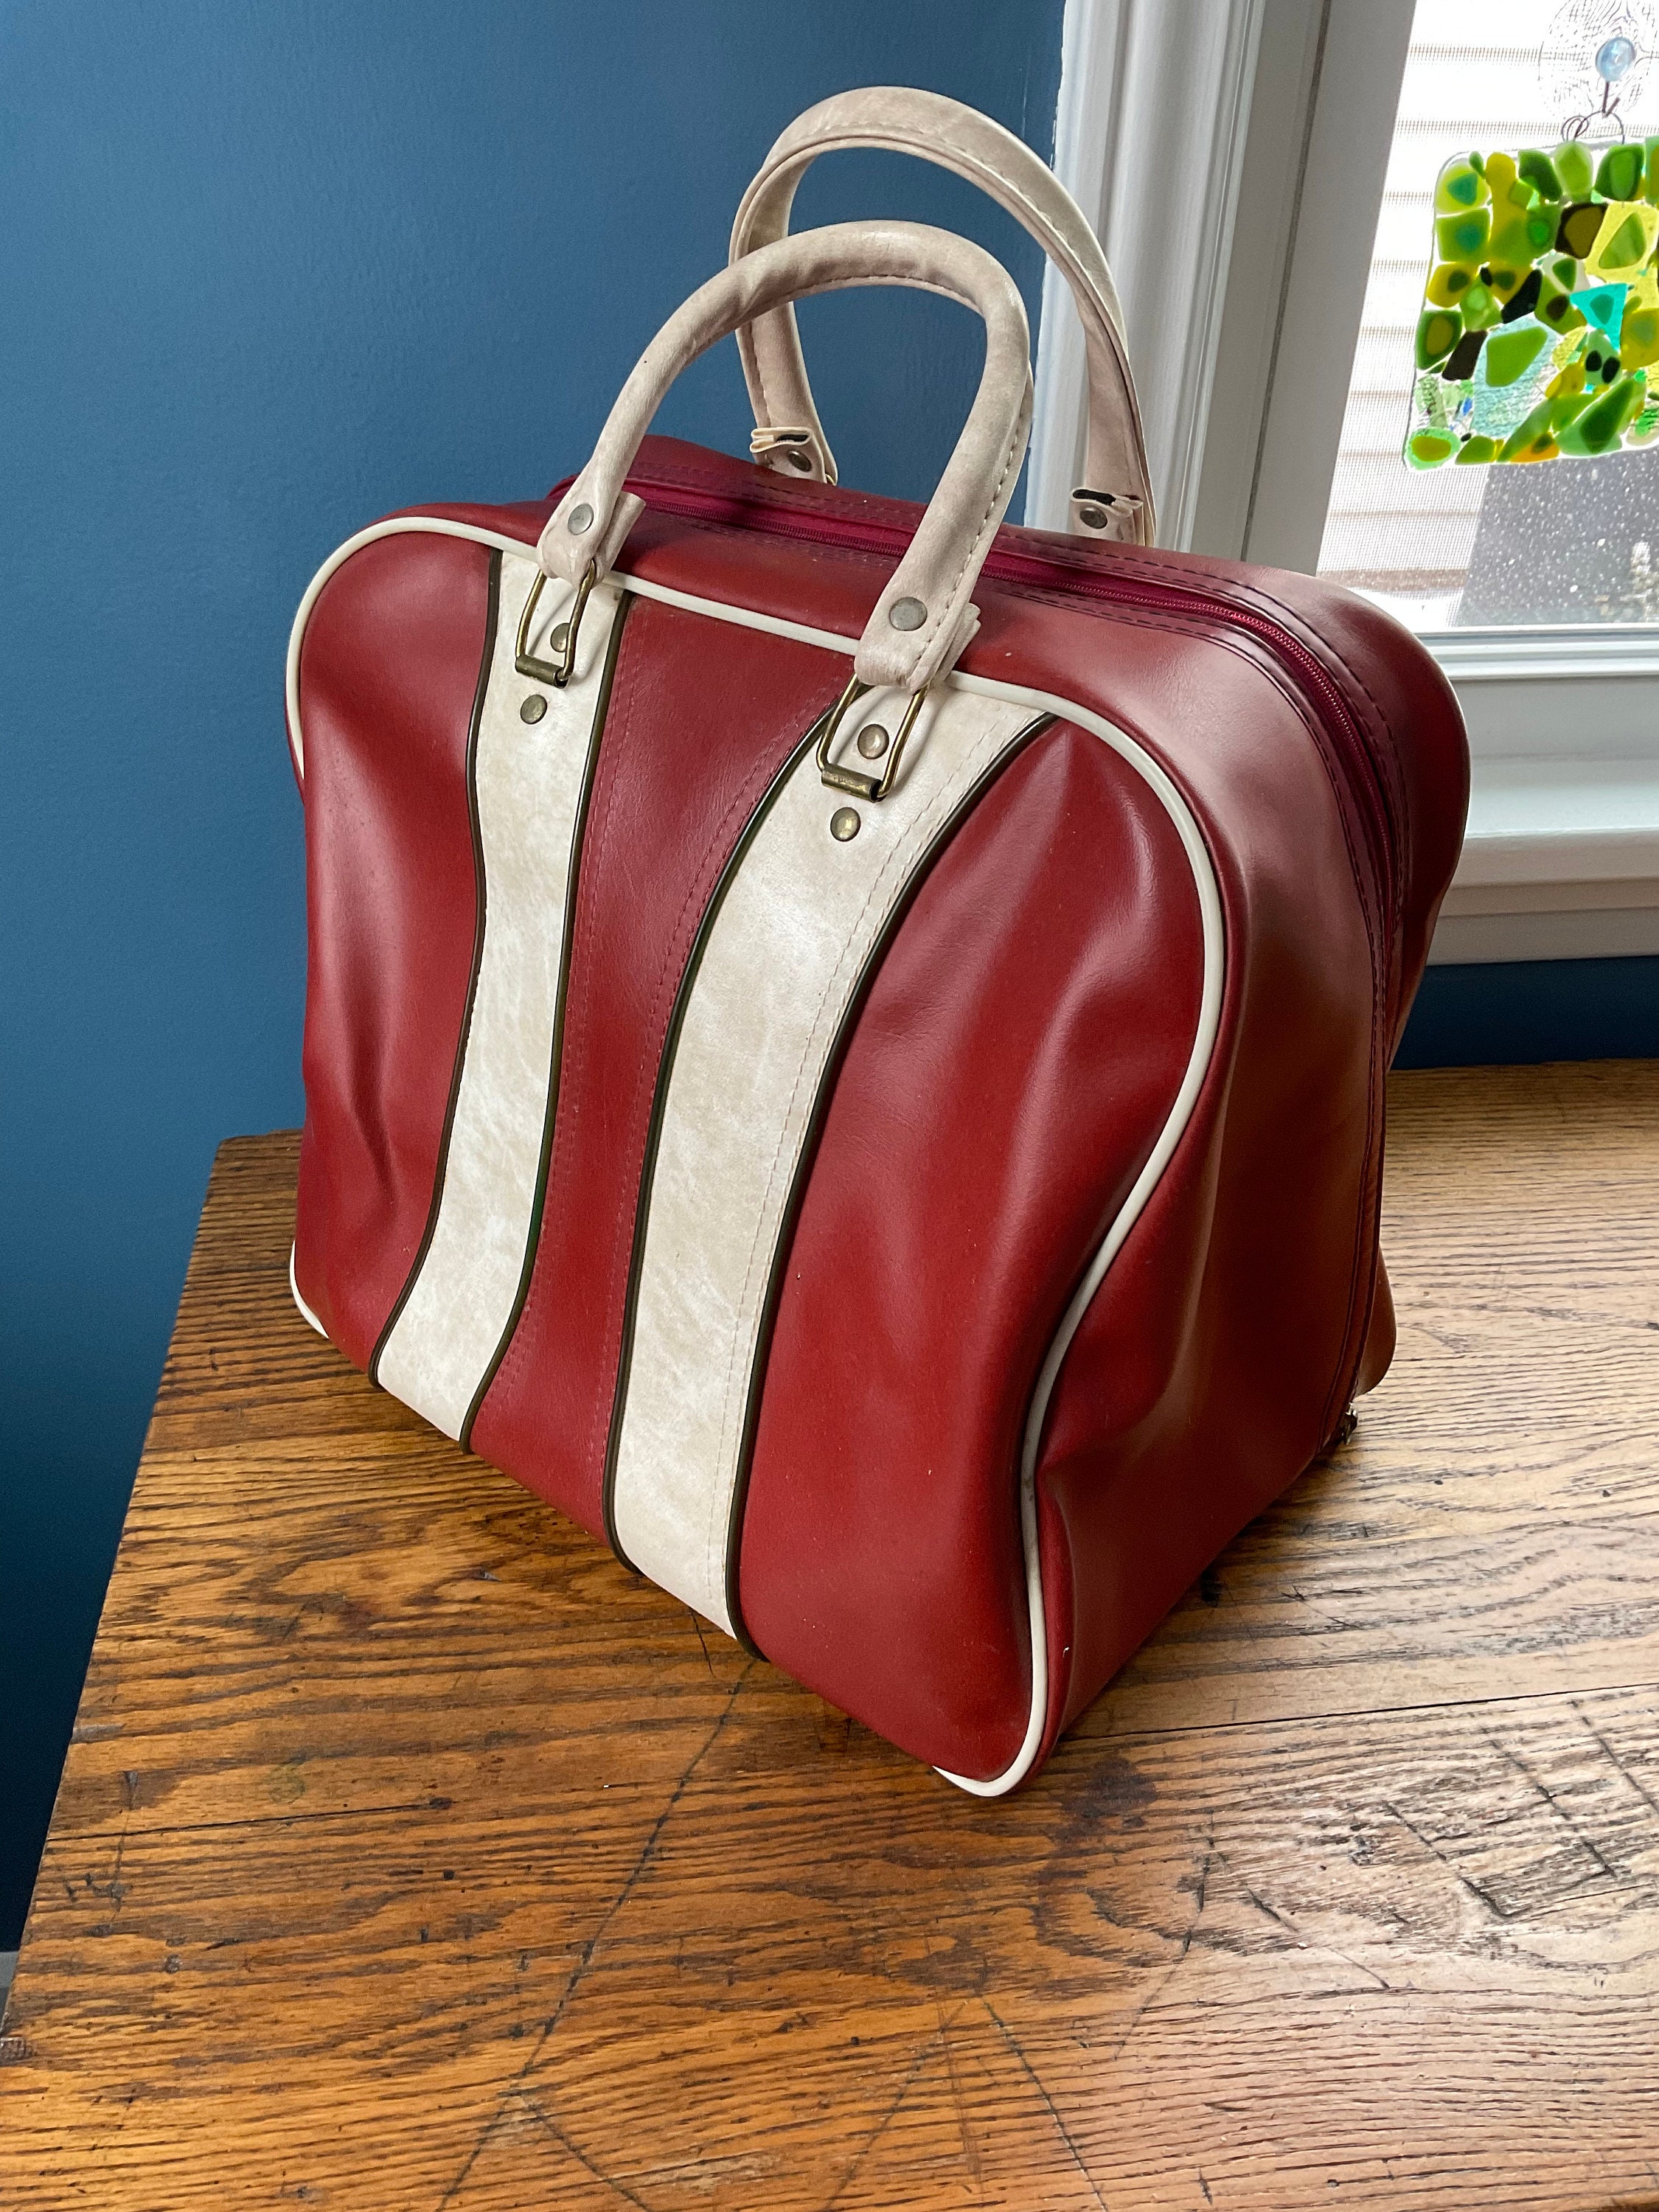 Vintage Bowling Ball Bag Burgundy and Marbled White 